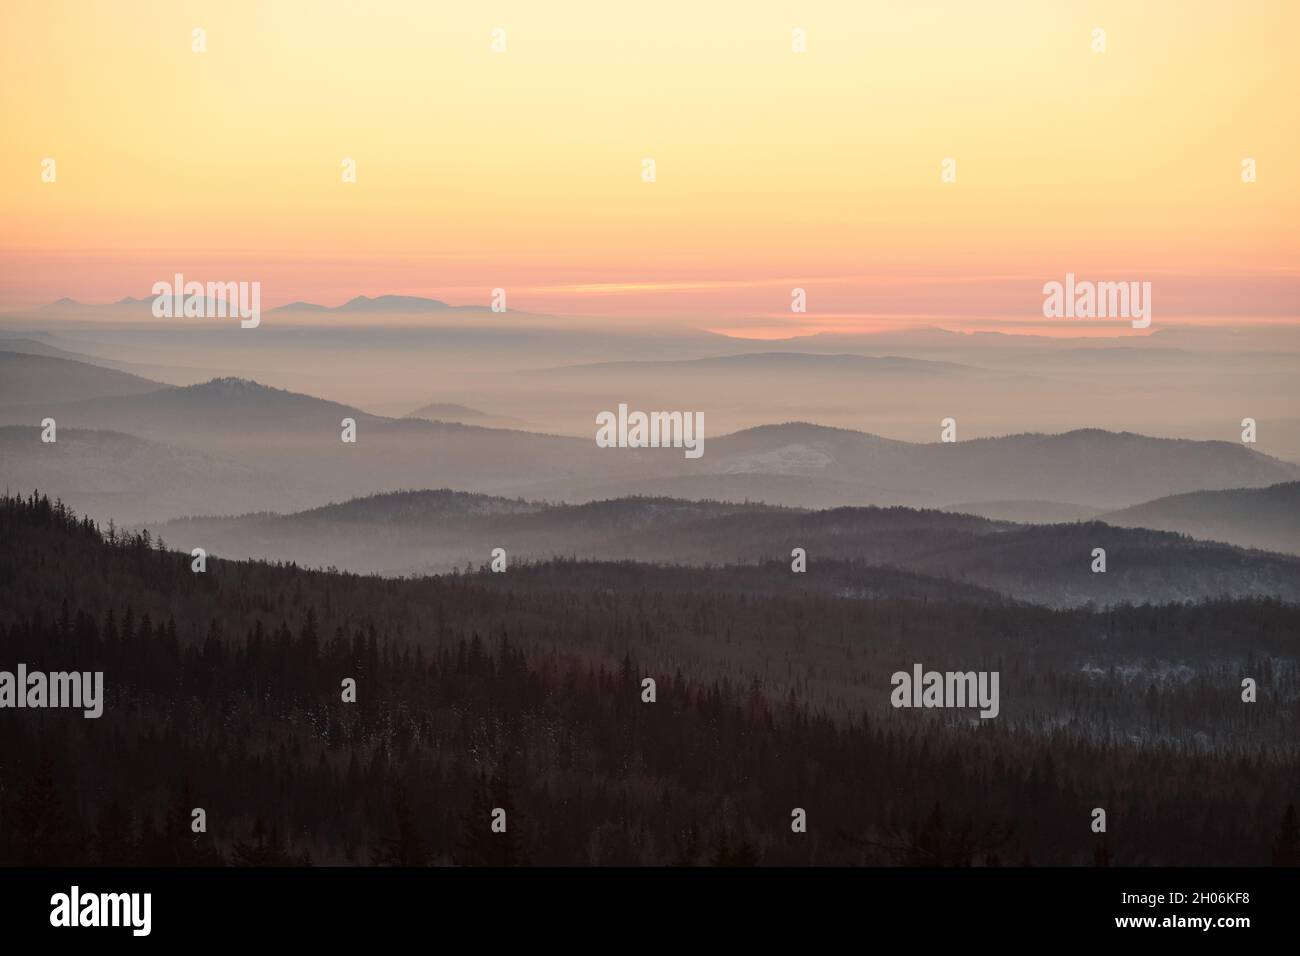 Majestic scenery of pink and yellow sky and mountains covered with forest at dawn Stock Photo